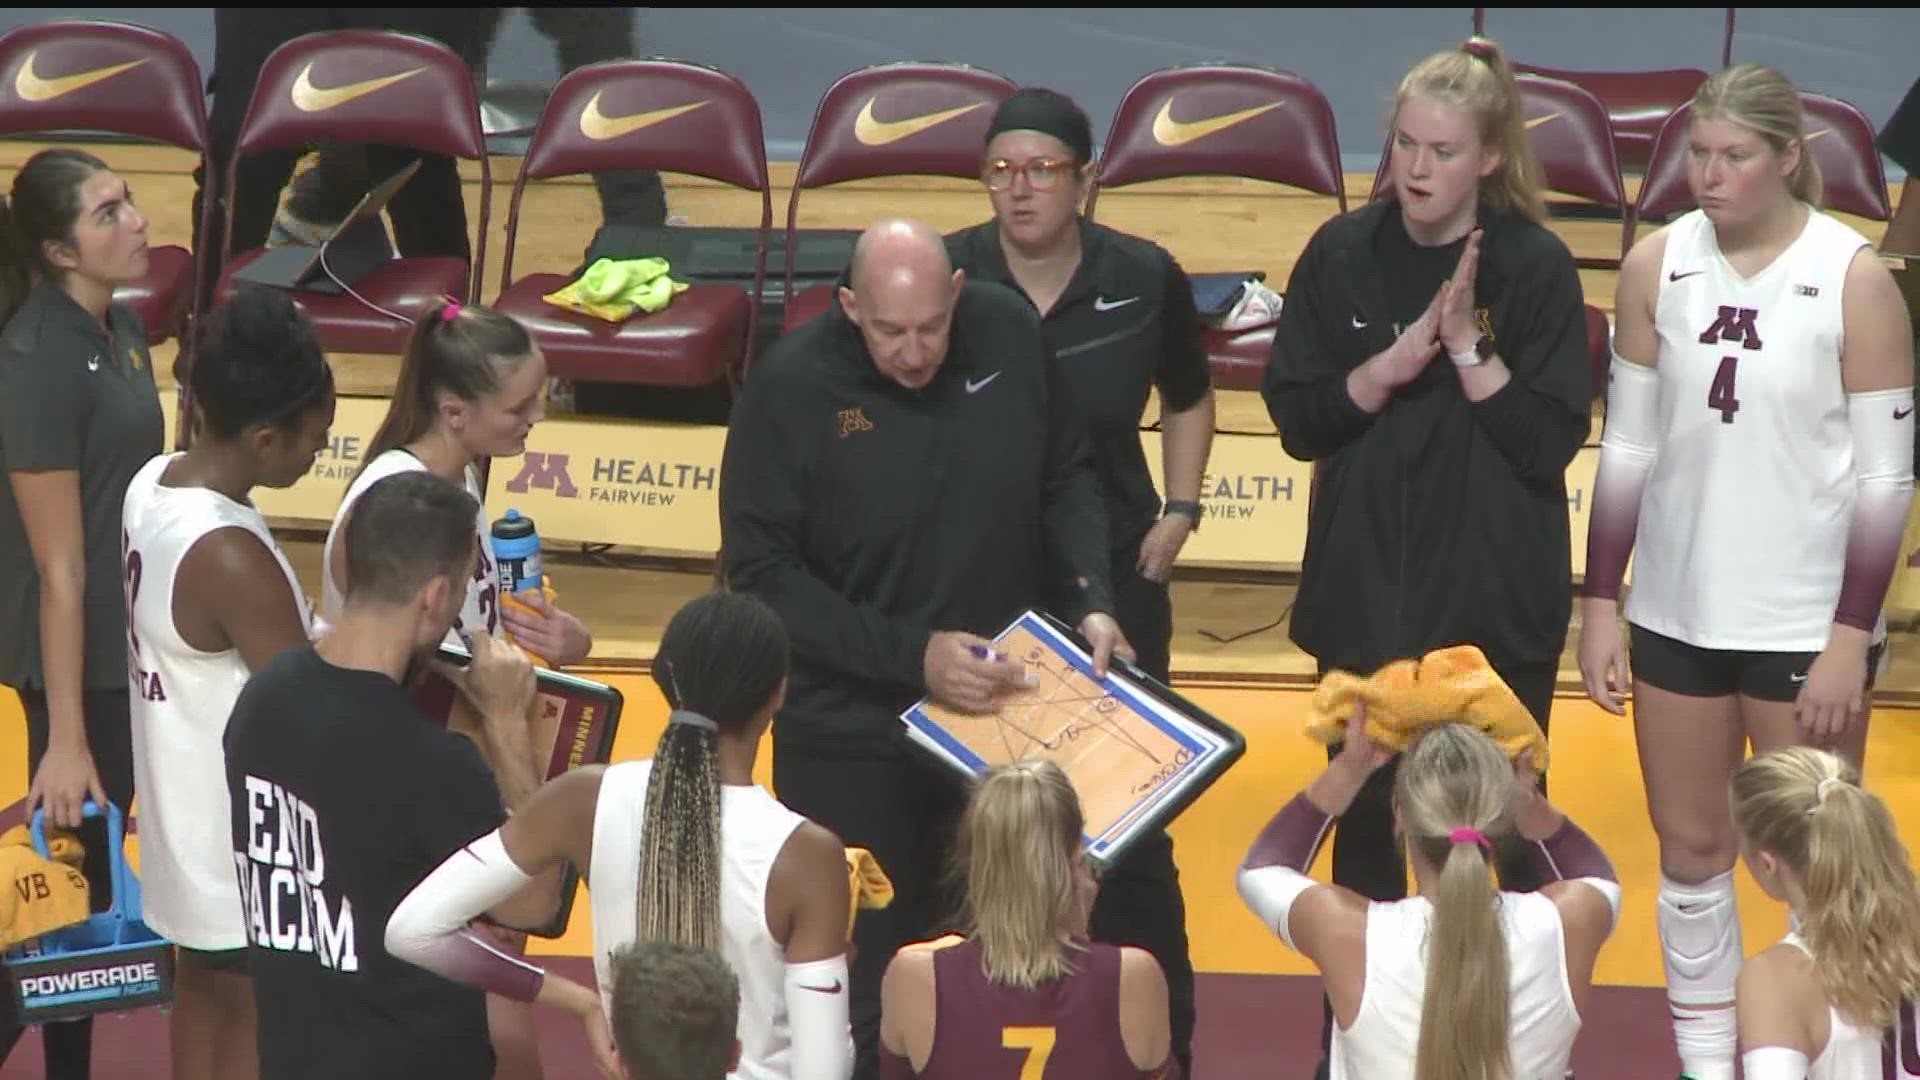 Gophers head volleyball coach announced Sunday this will be his final season as head coach.